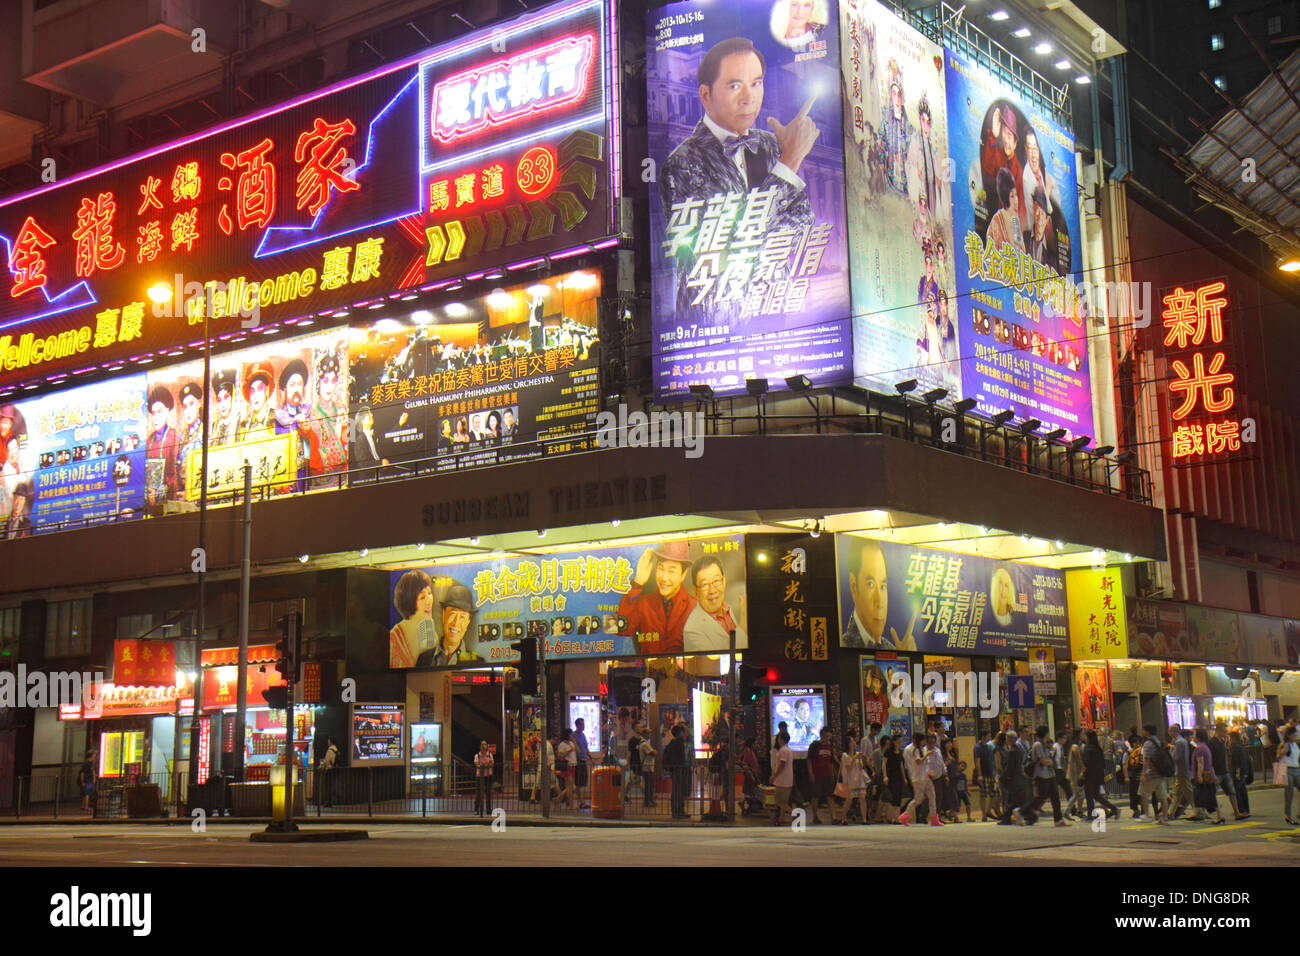 Hong Kong China,HK,Asia,Chinese,Oriental,Island,North Point,King's Road,night,giant billboards,ad,advertising,ads,neon sign,Cantonese Chinese characte Stock Photo